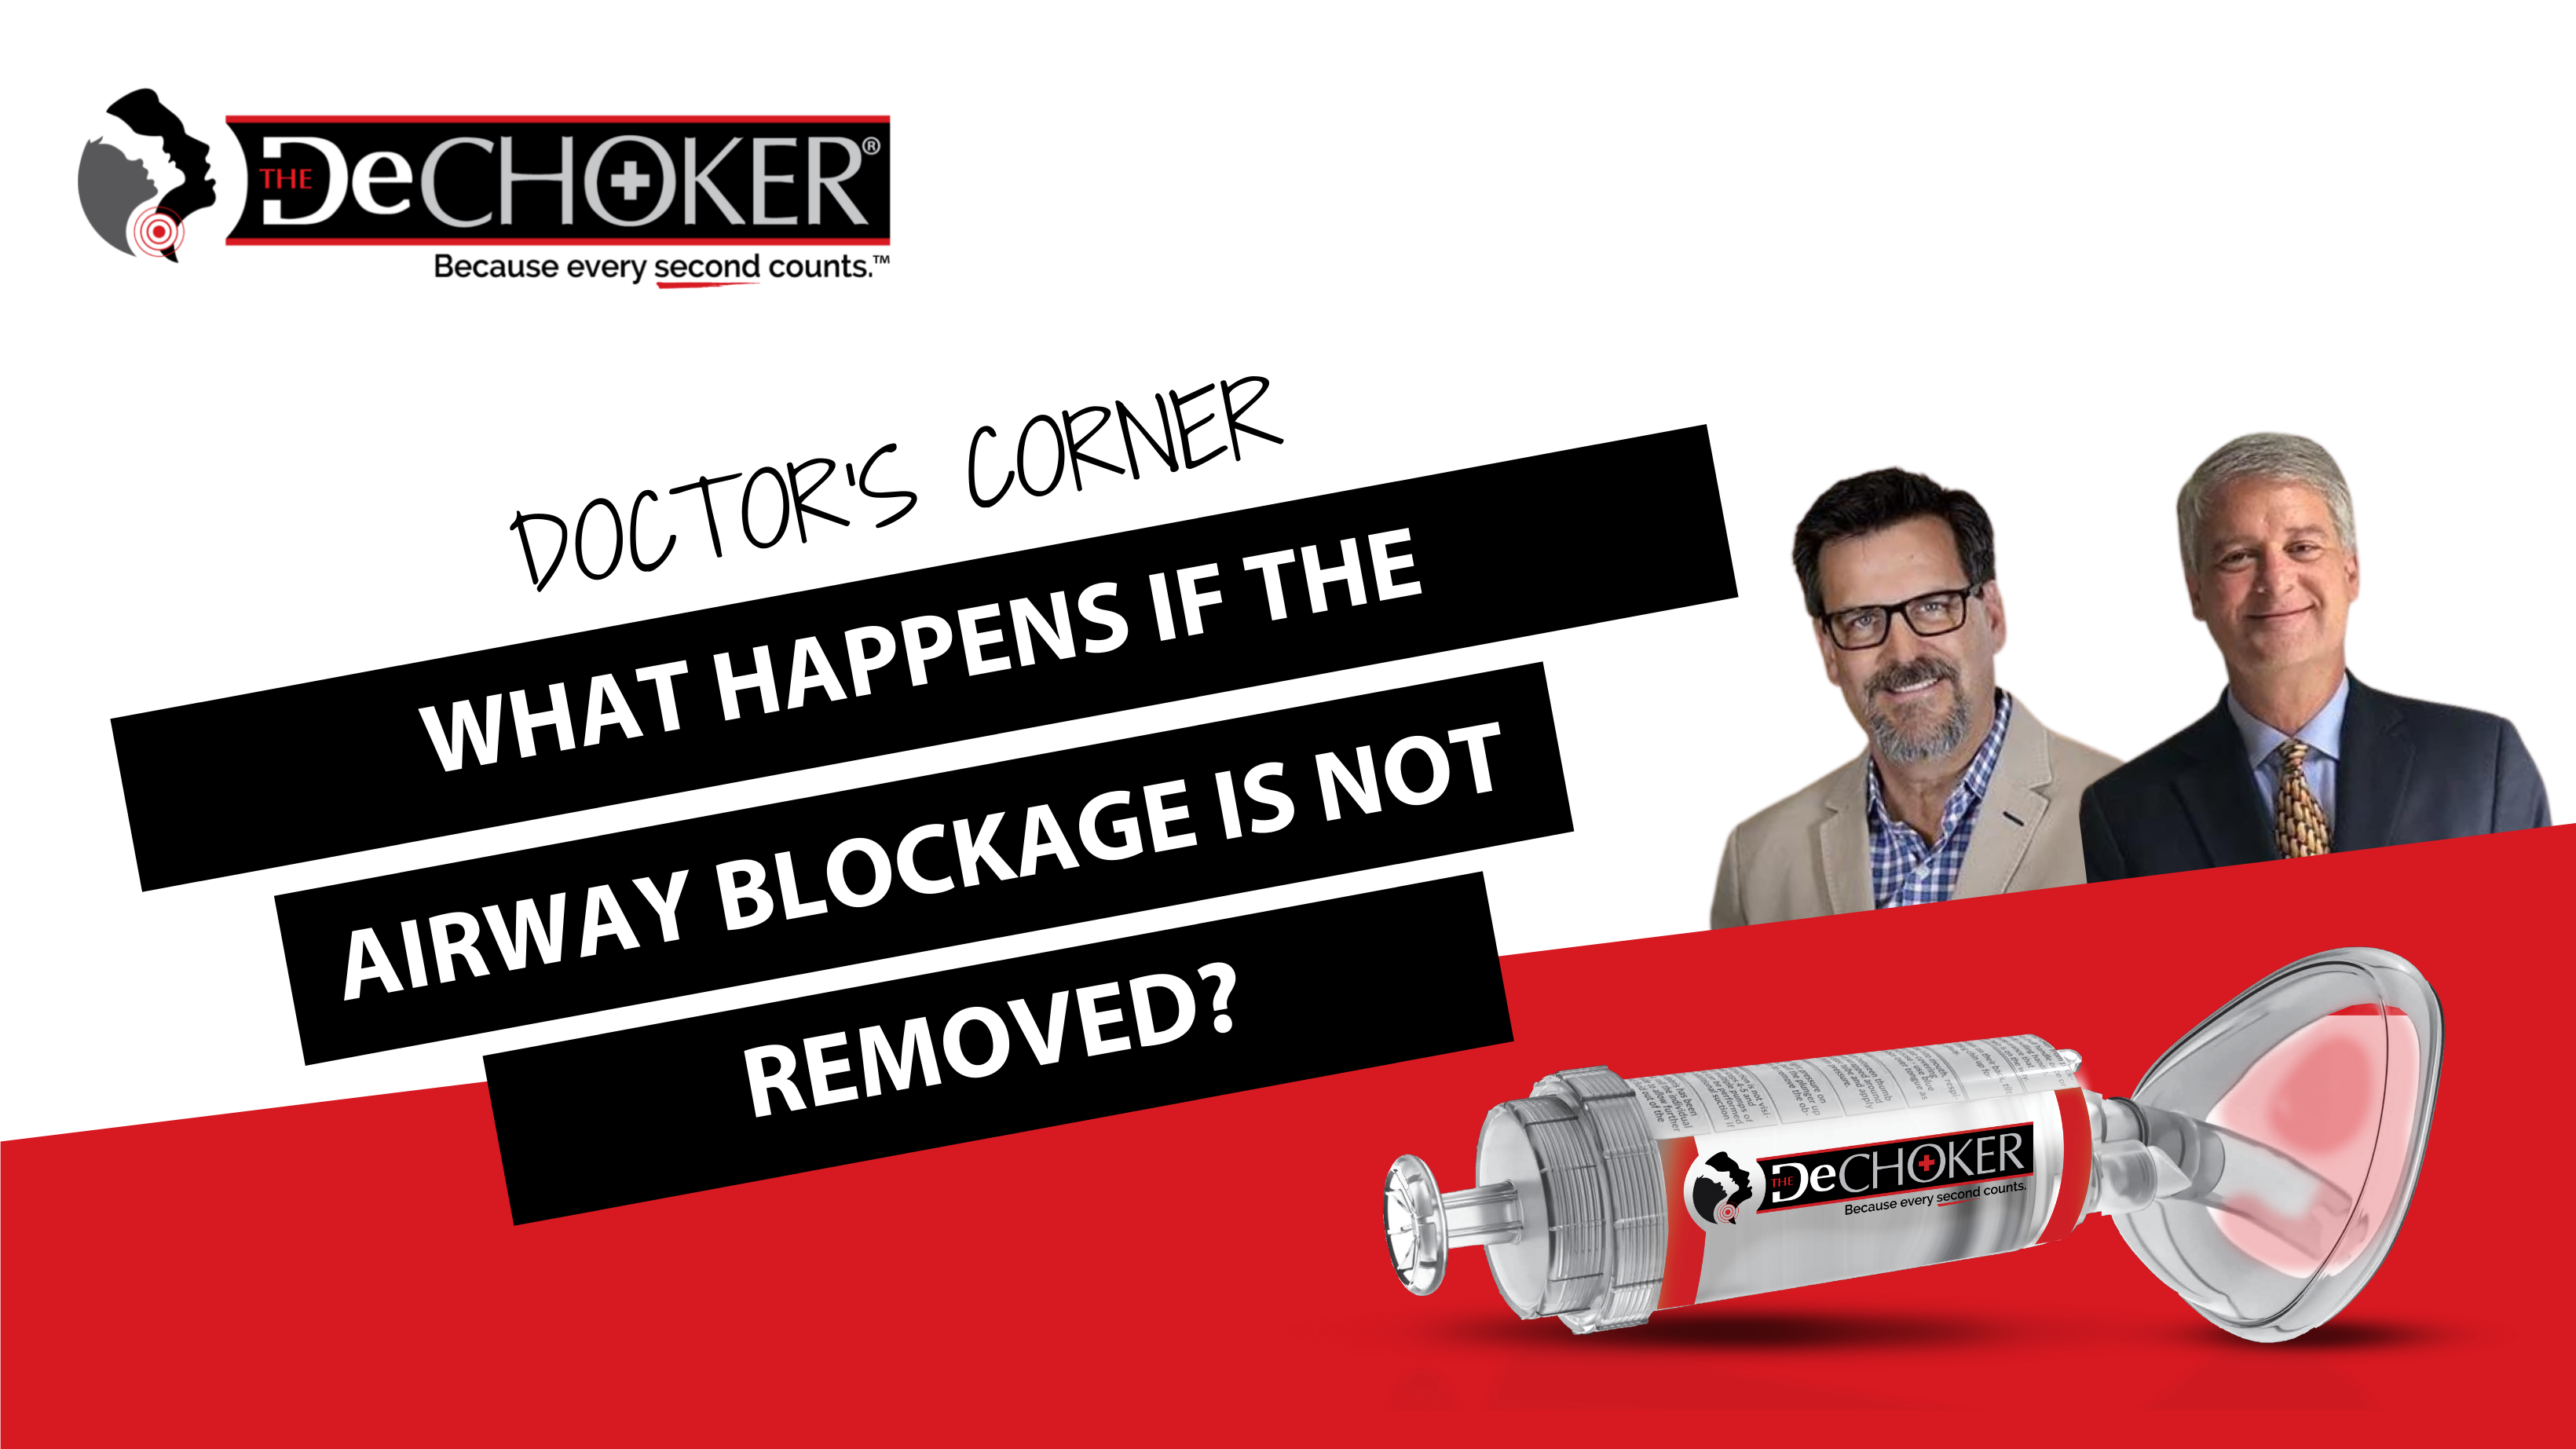 What happens if the airway blockage is not removed?